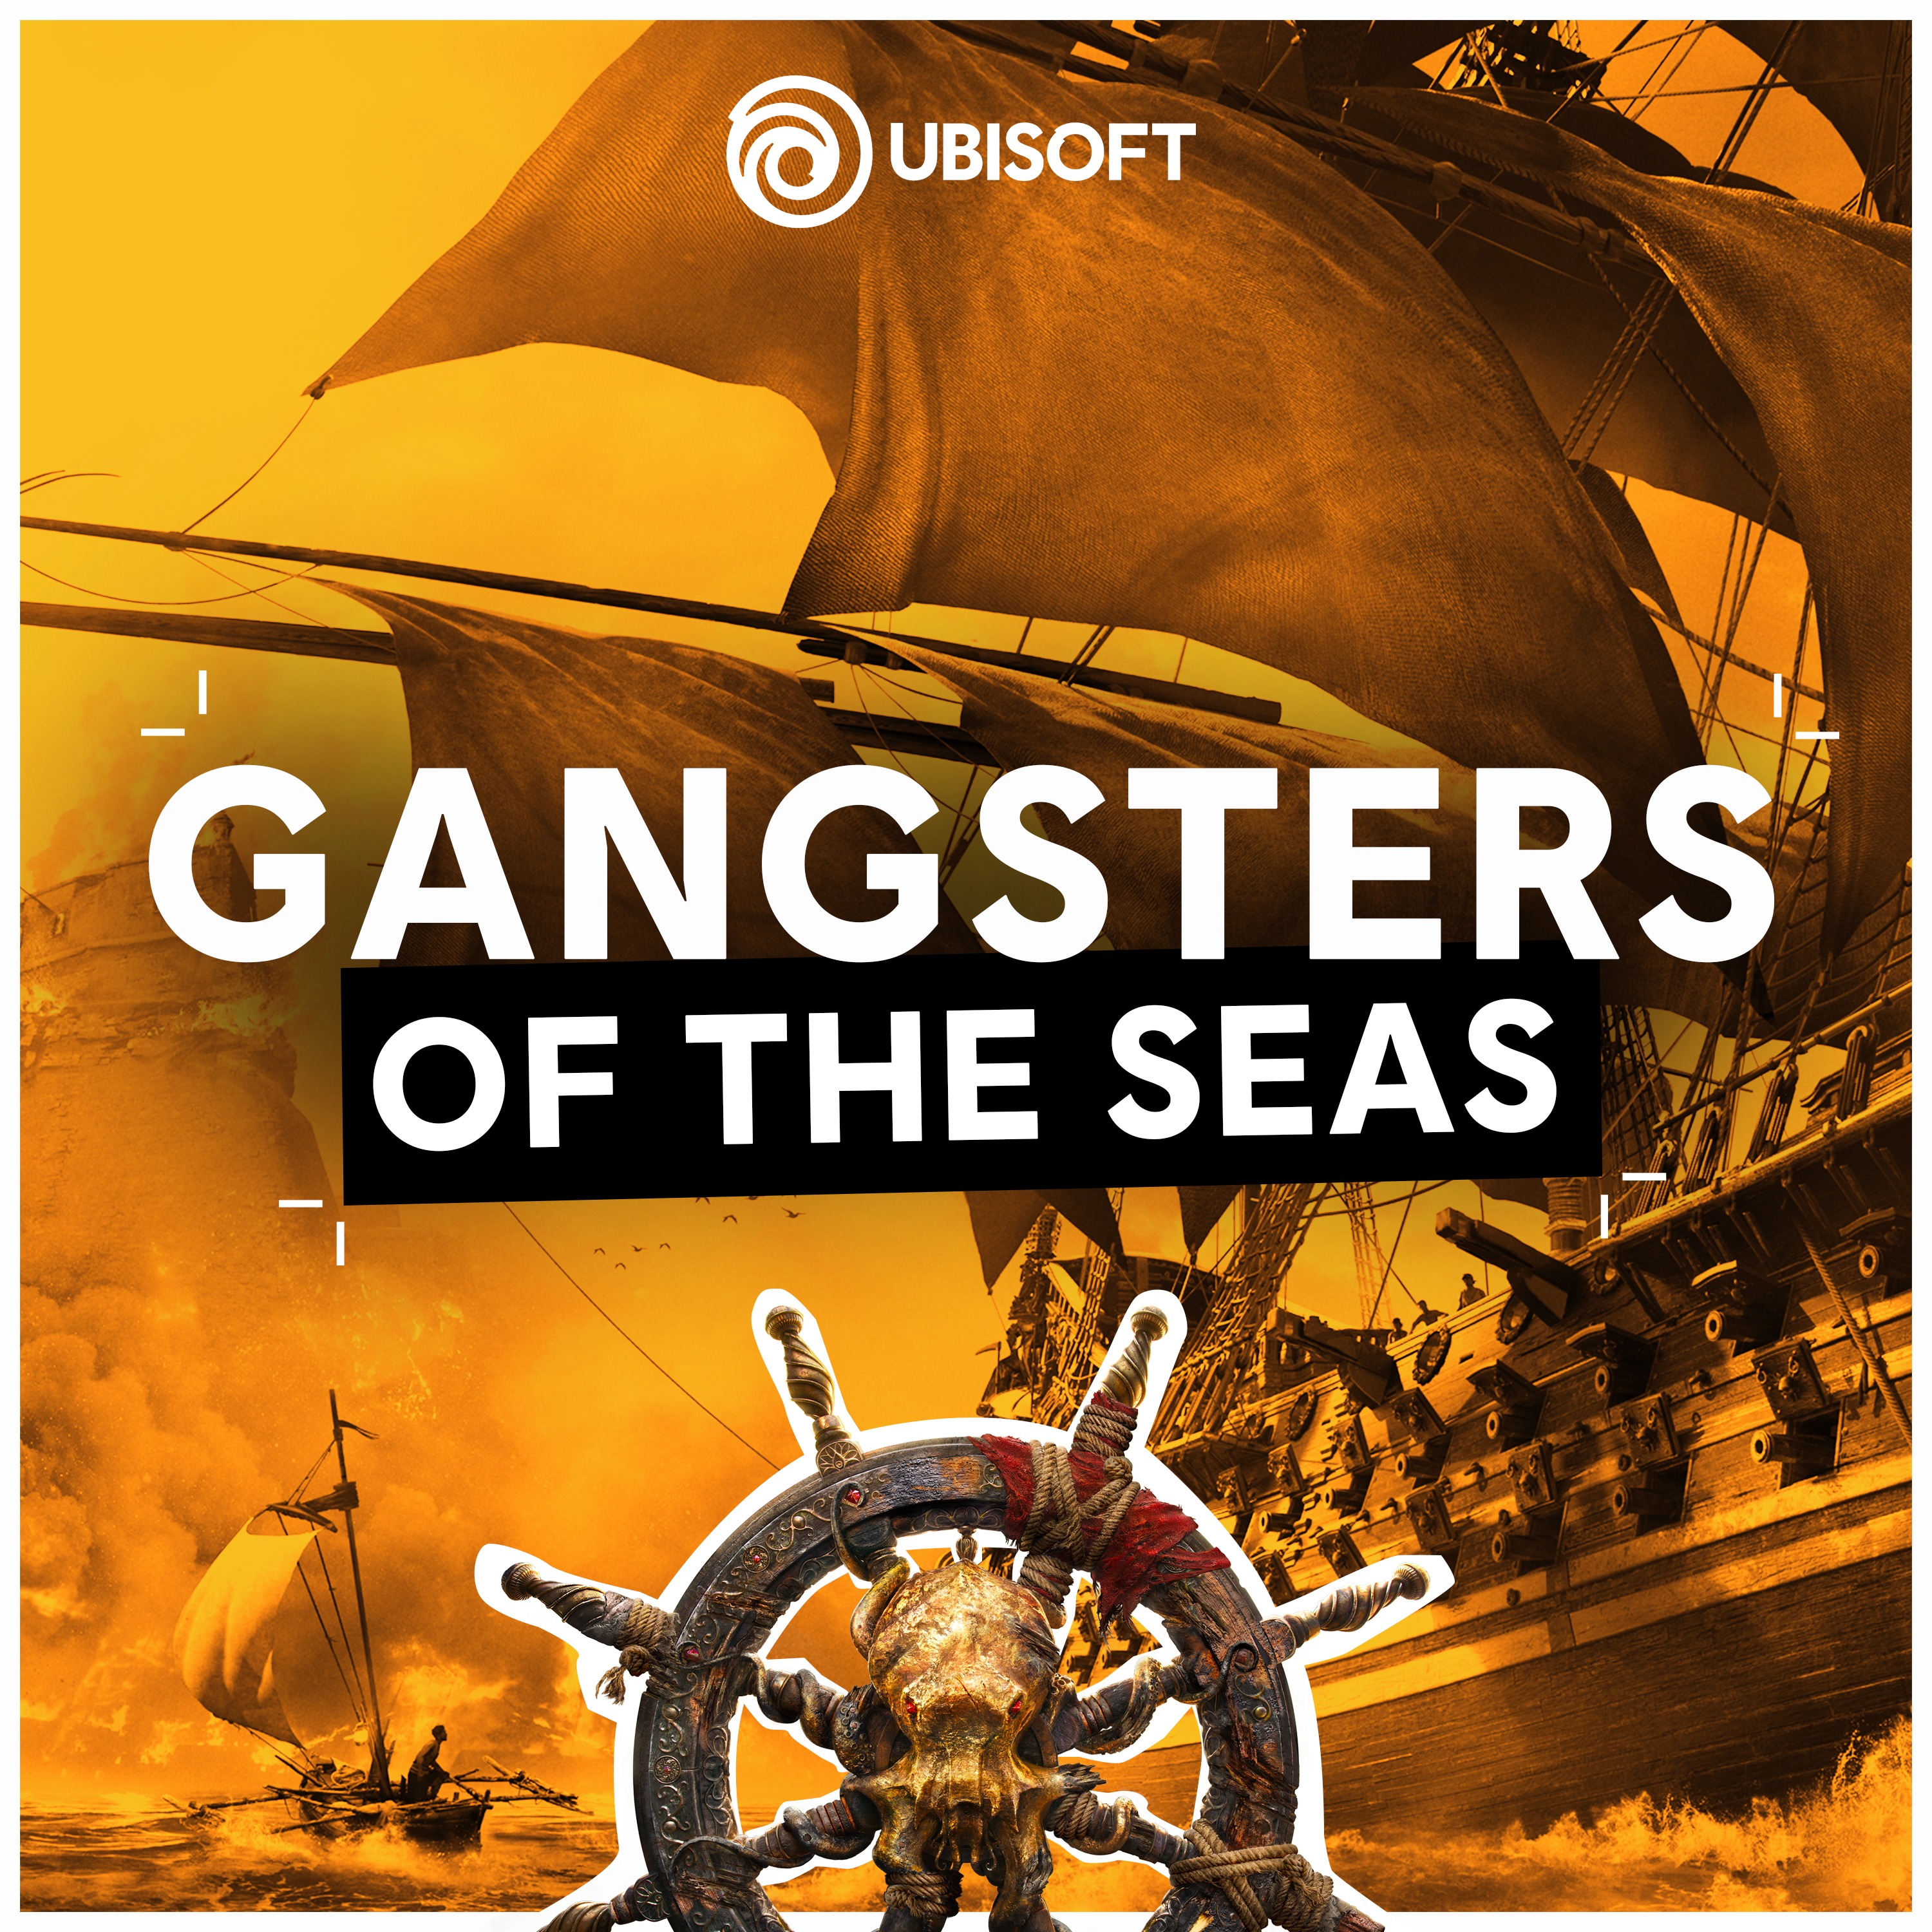 Gangsters of the Seas | EP 6 | Mathurin Desmarestz, for whom freedom was the greatest treasure